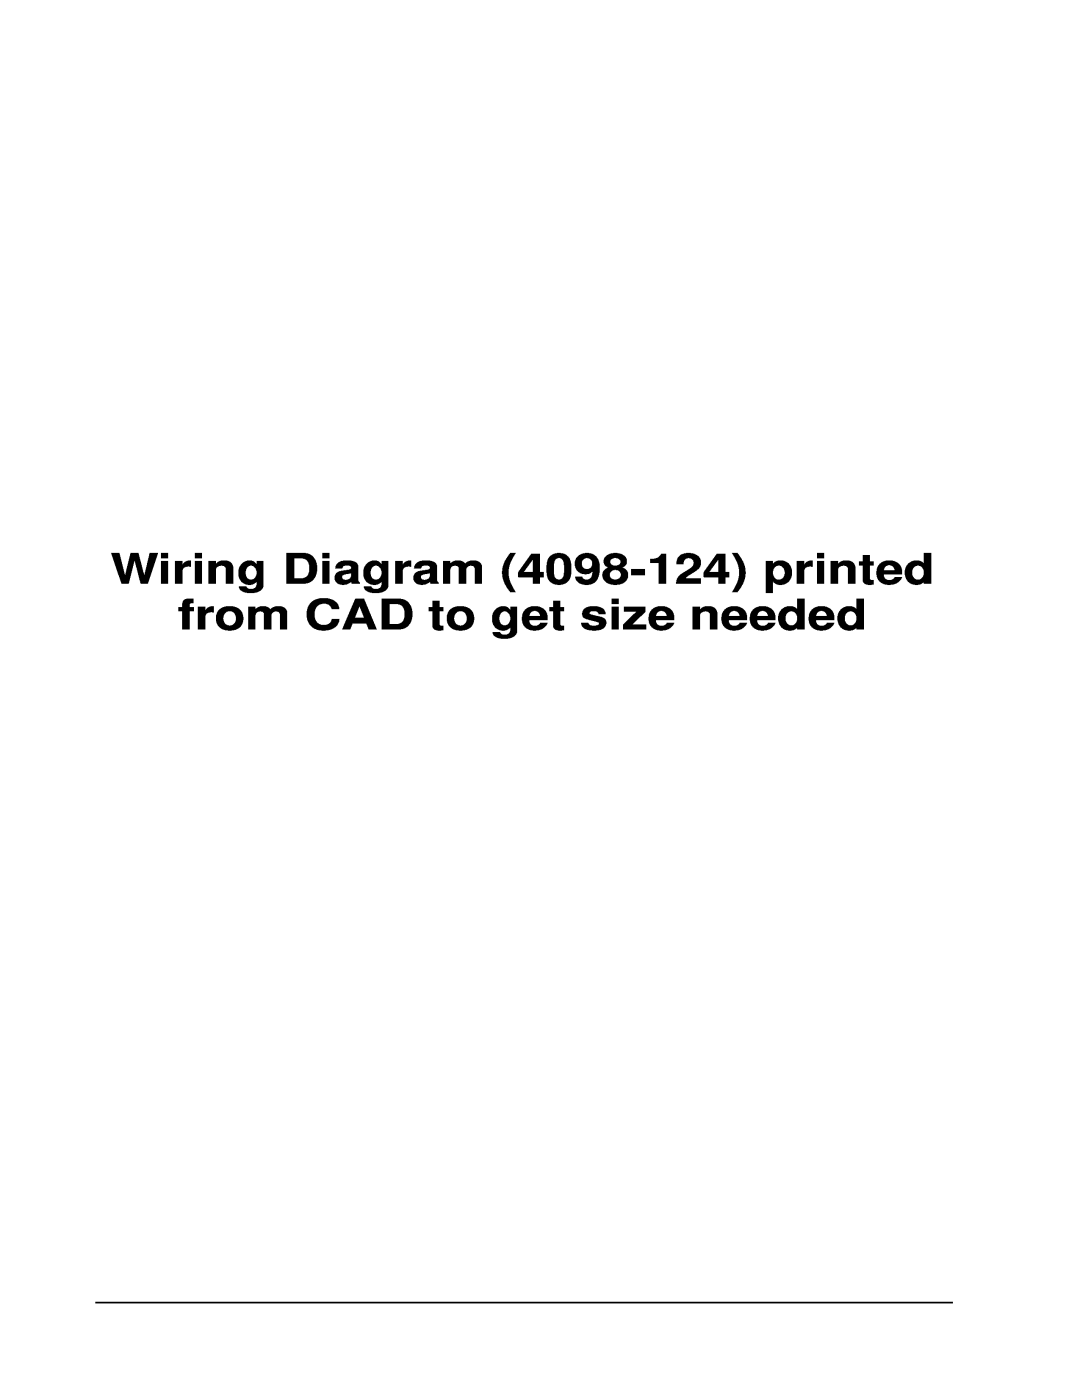 Bard PH1236, PH1230, PH1224 Wiring Diagram 4098-124printed, from CAD to get size needed, Manual 2100-344Page 